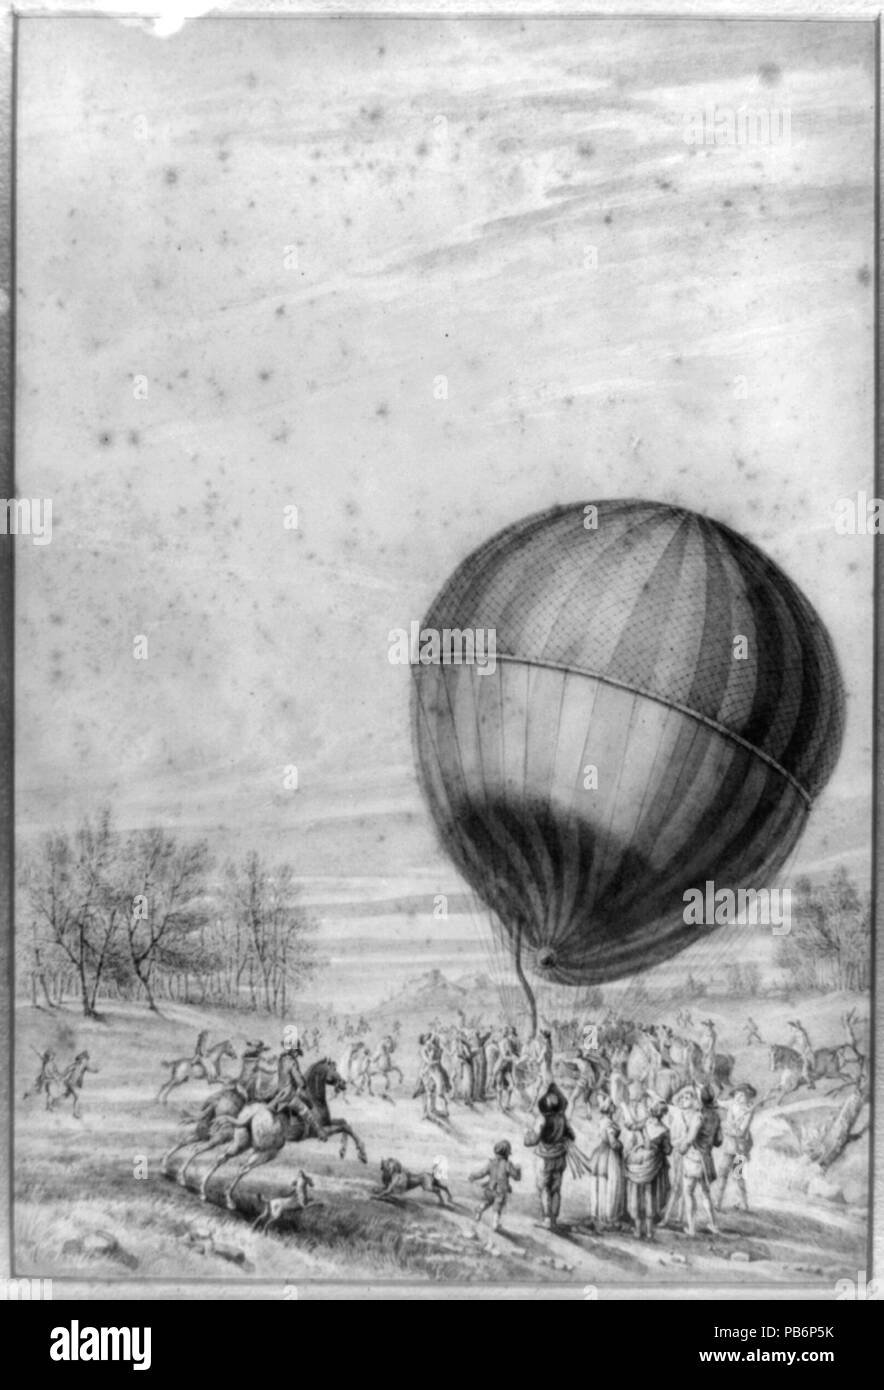 1610 The 'Aerostatic globe' balloon, belonging to Jacques Charles and Marie-Noel Robert, descending on the plain of Nesle, near Beaumont, France LCCN2002735670 Stock Photo